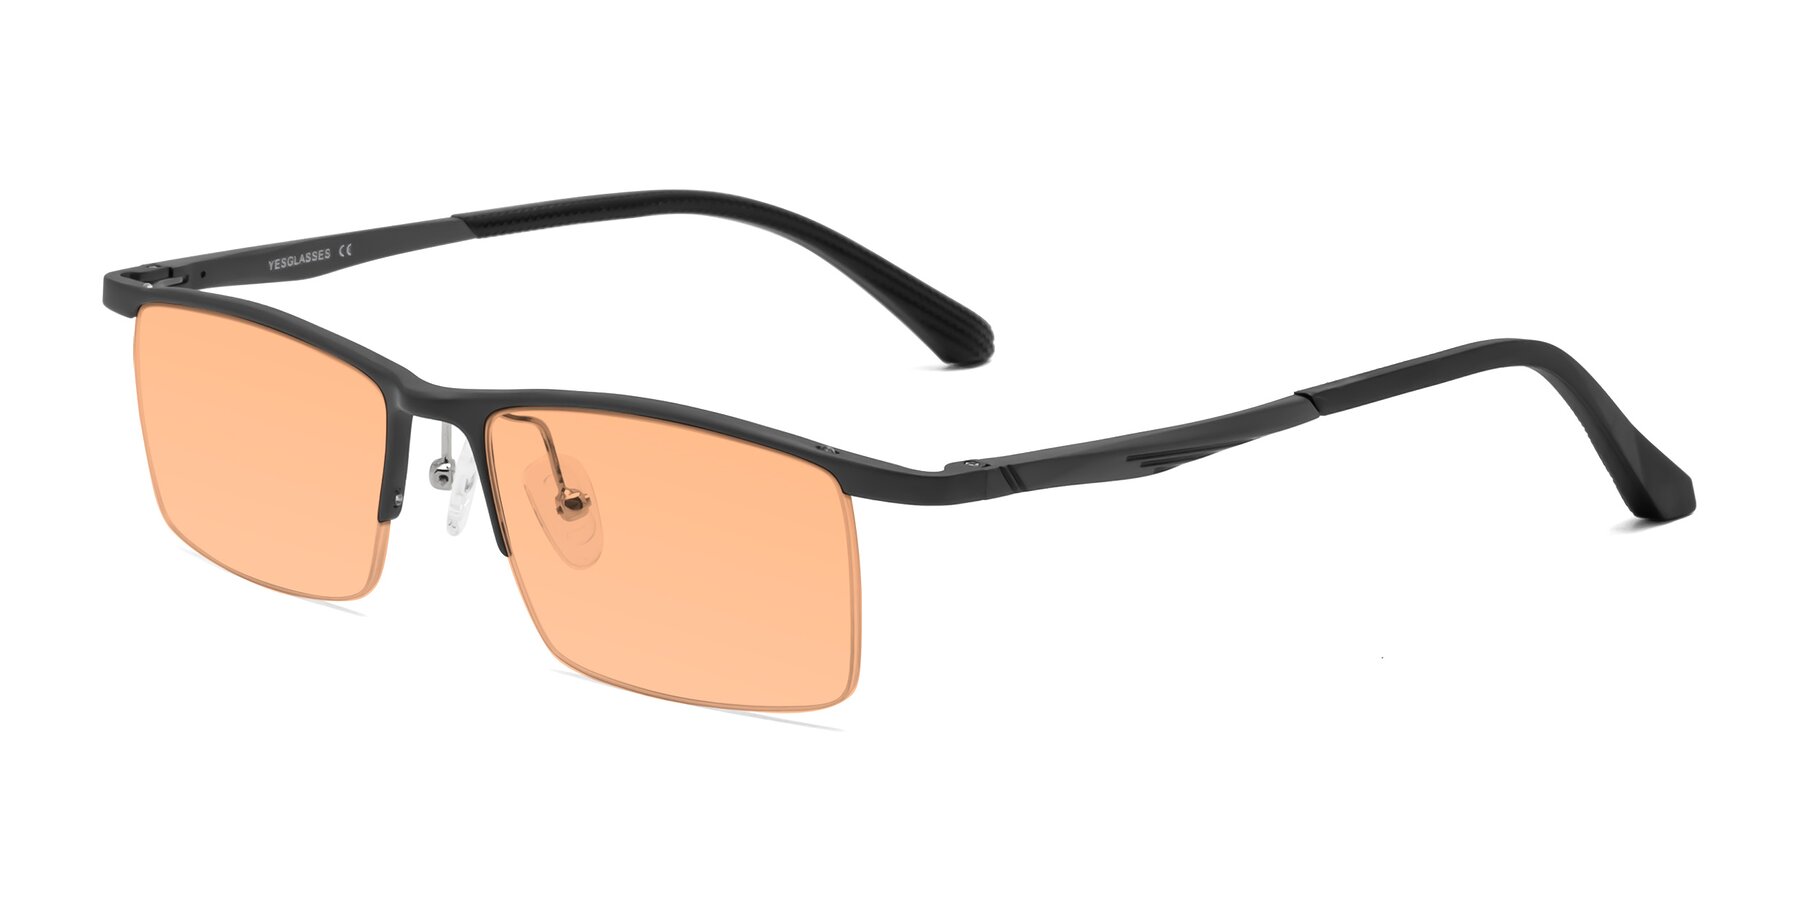 Angle of CX6236 in Gunmetal with Light Orange Tinted Lenses